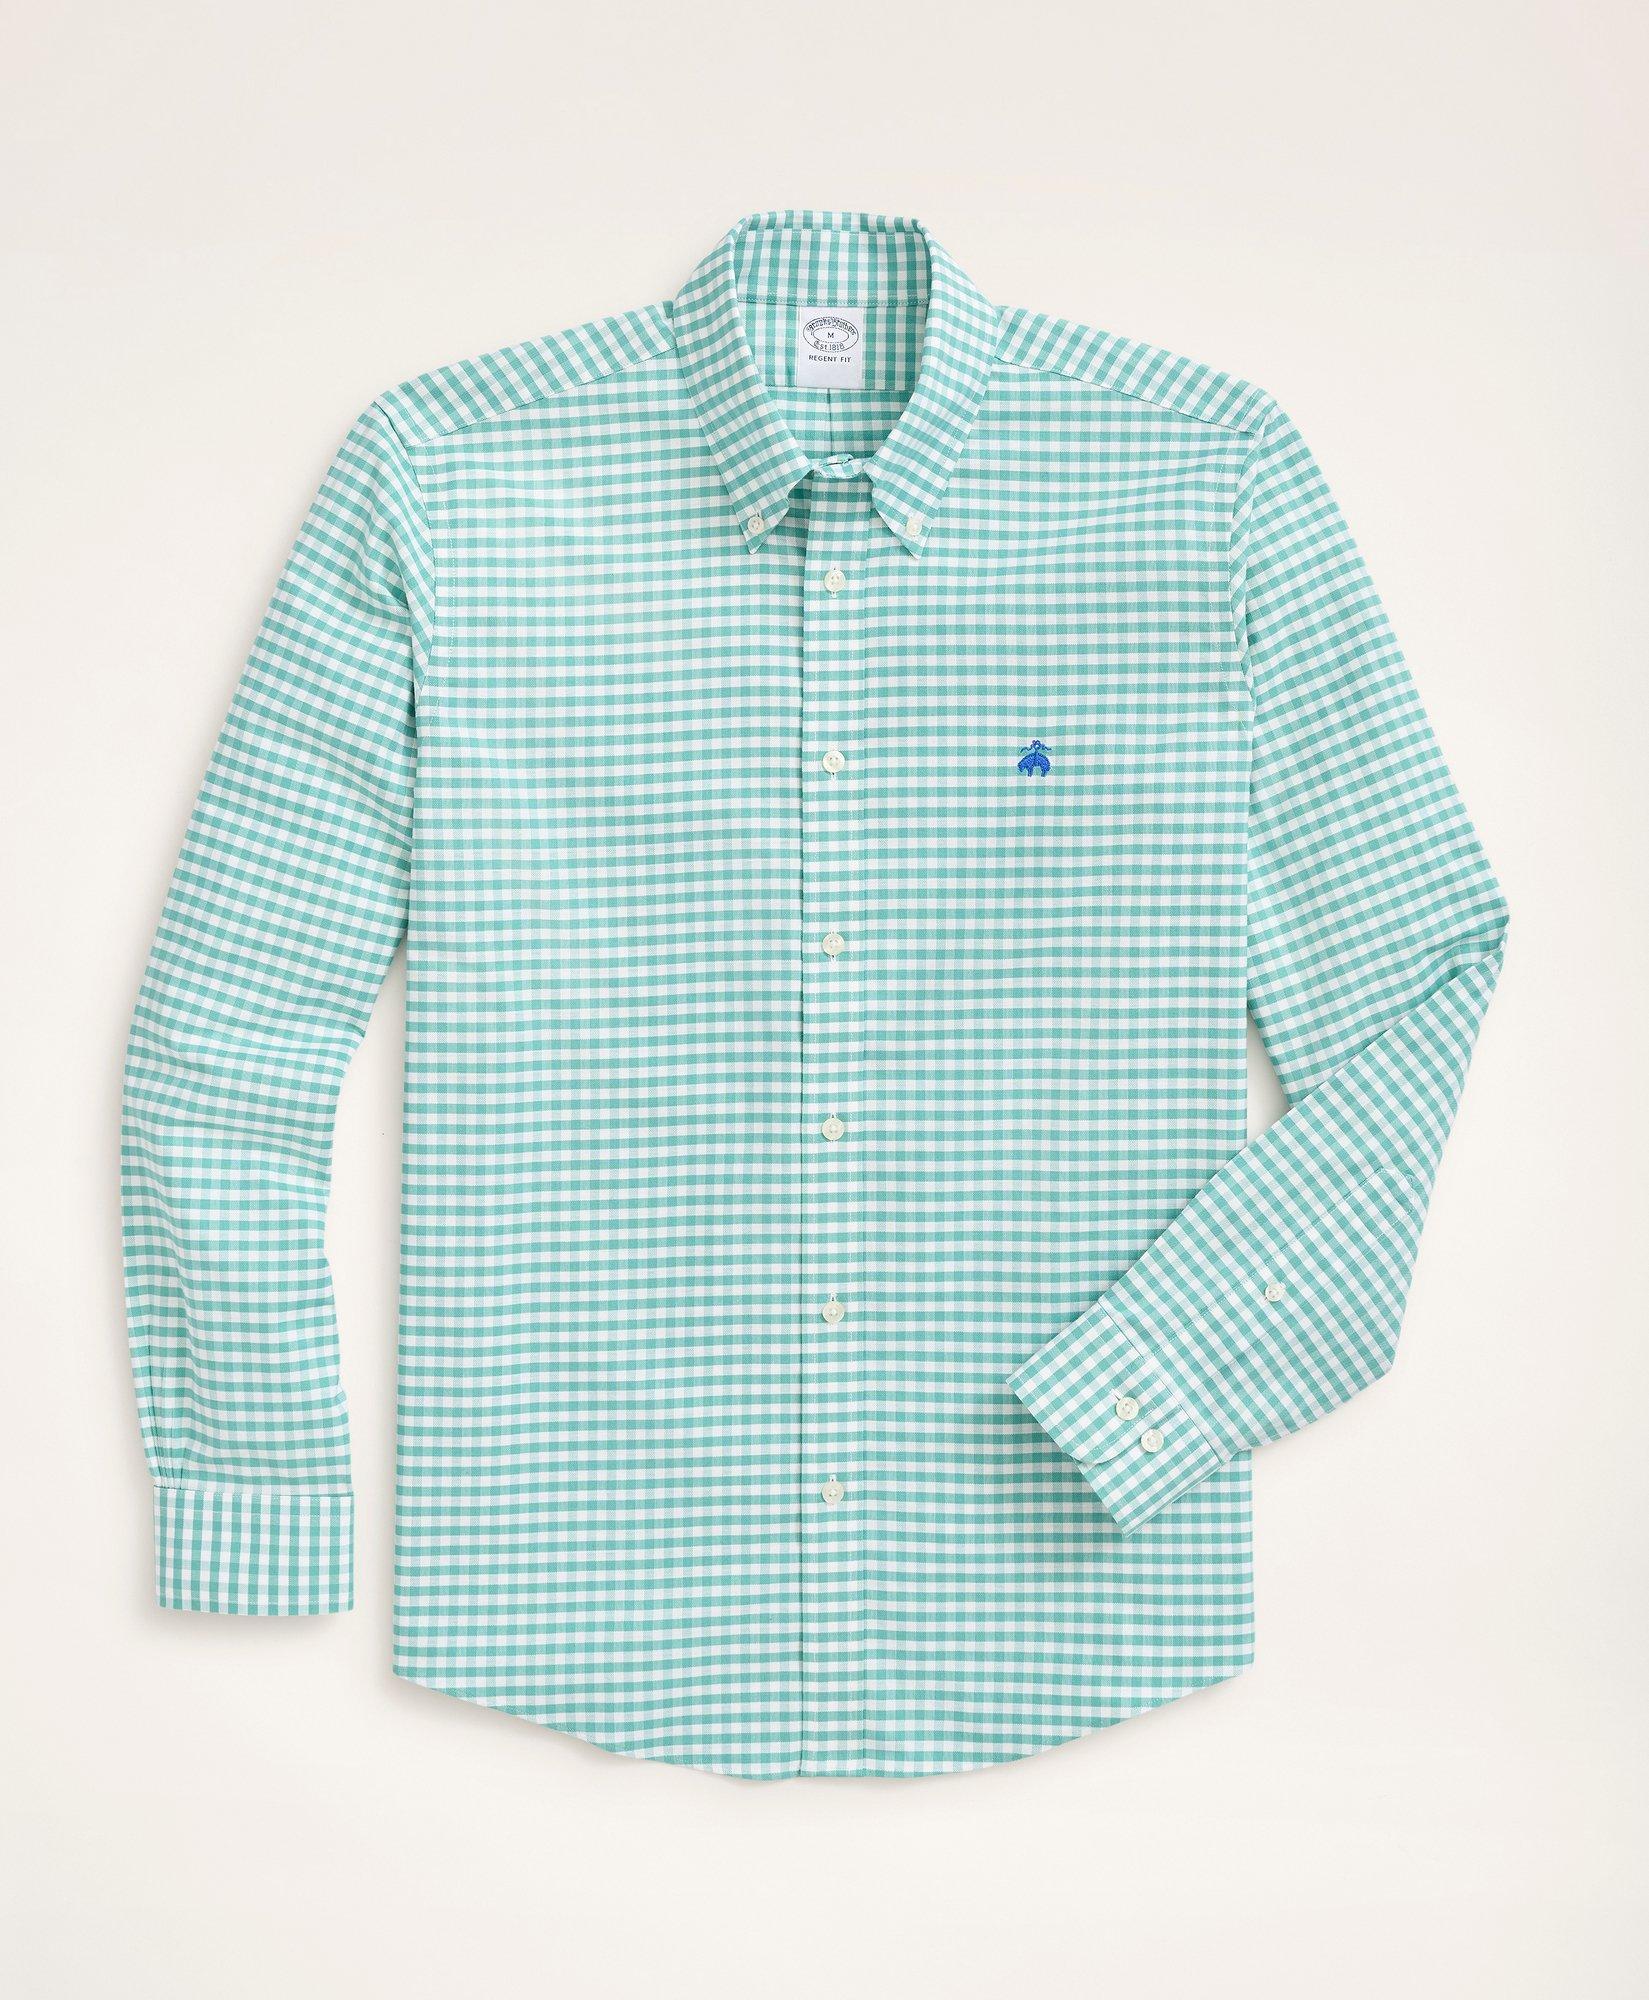 Brooks Brothers Stretch Regent Regular-fit Sport Shirt, Non-iron Gingham Oxford | Green | Size Xs